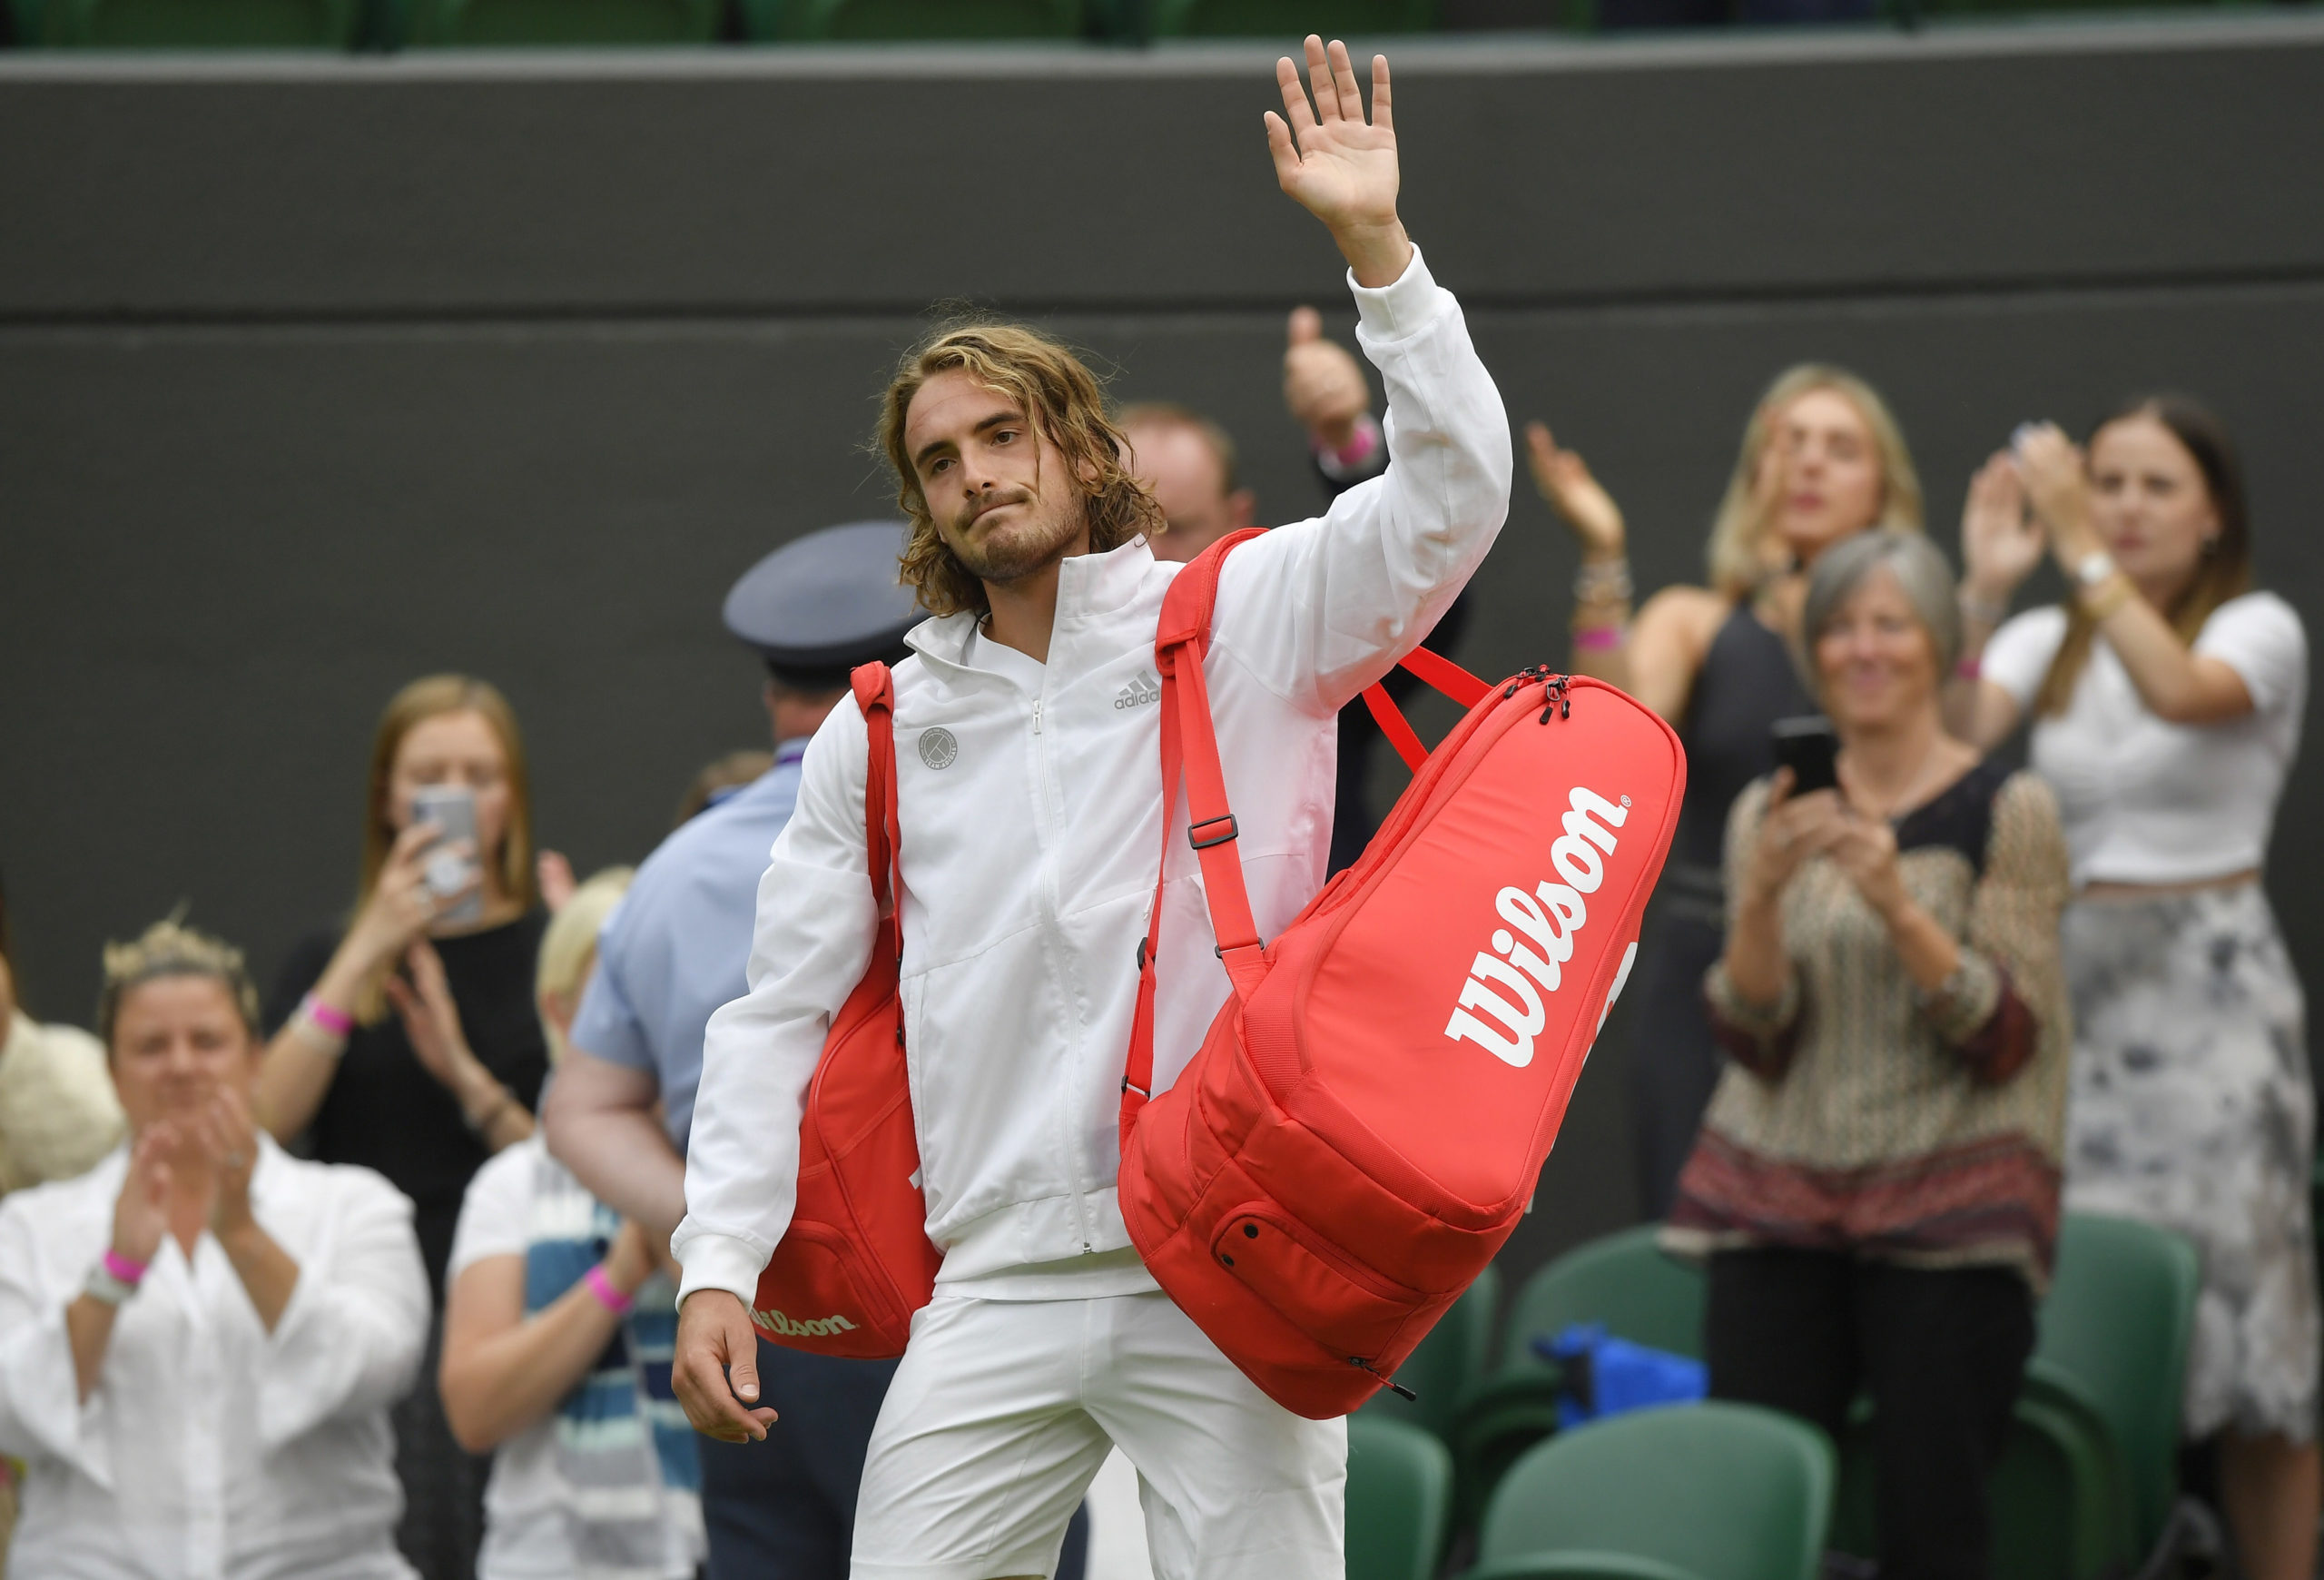 Greece's Stefanos Tsitsipas looks dejected as he waves after losing his first round match against Frances Tiafoe of the U.S. 